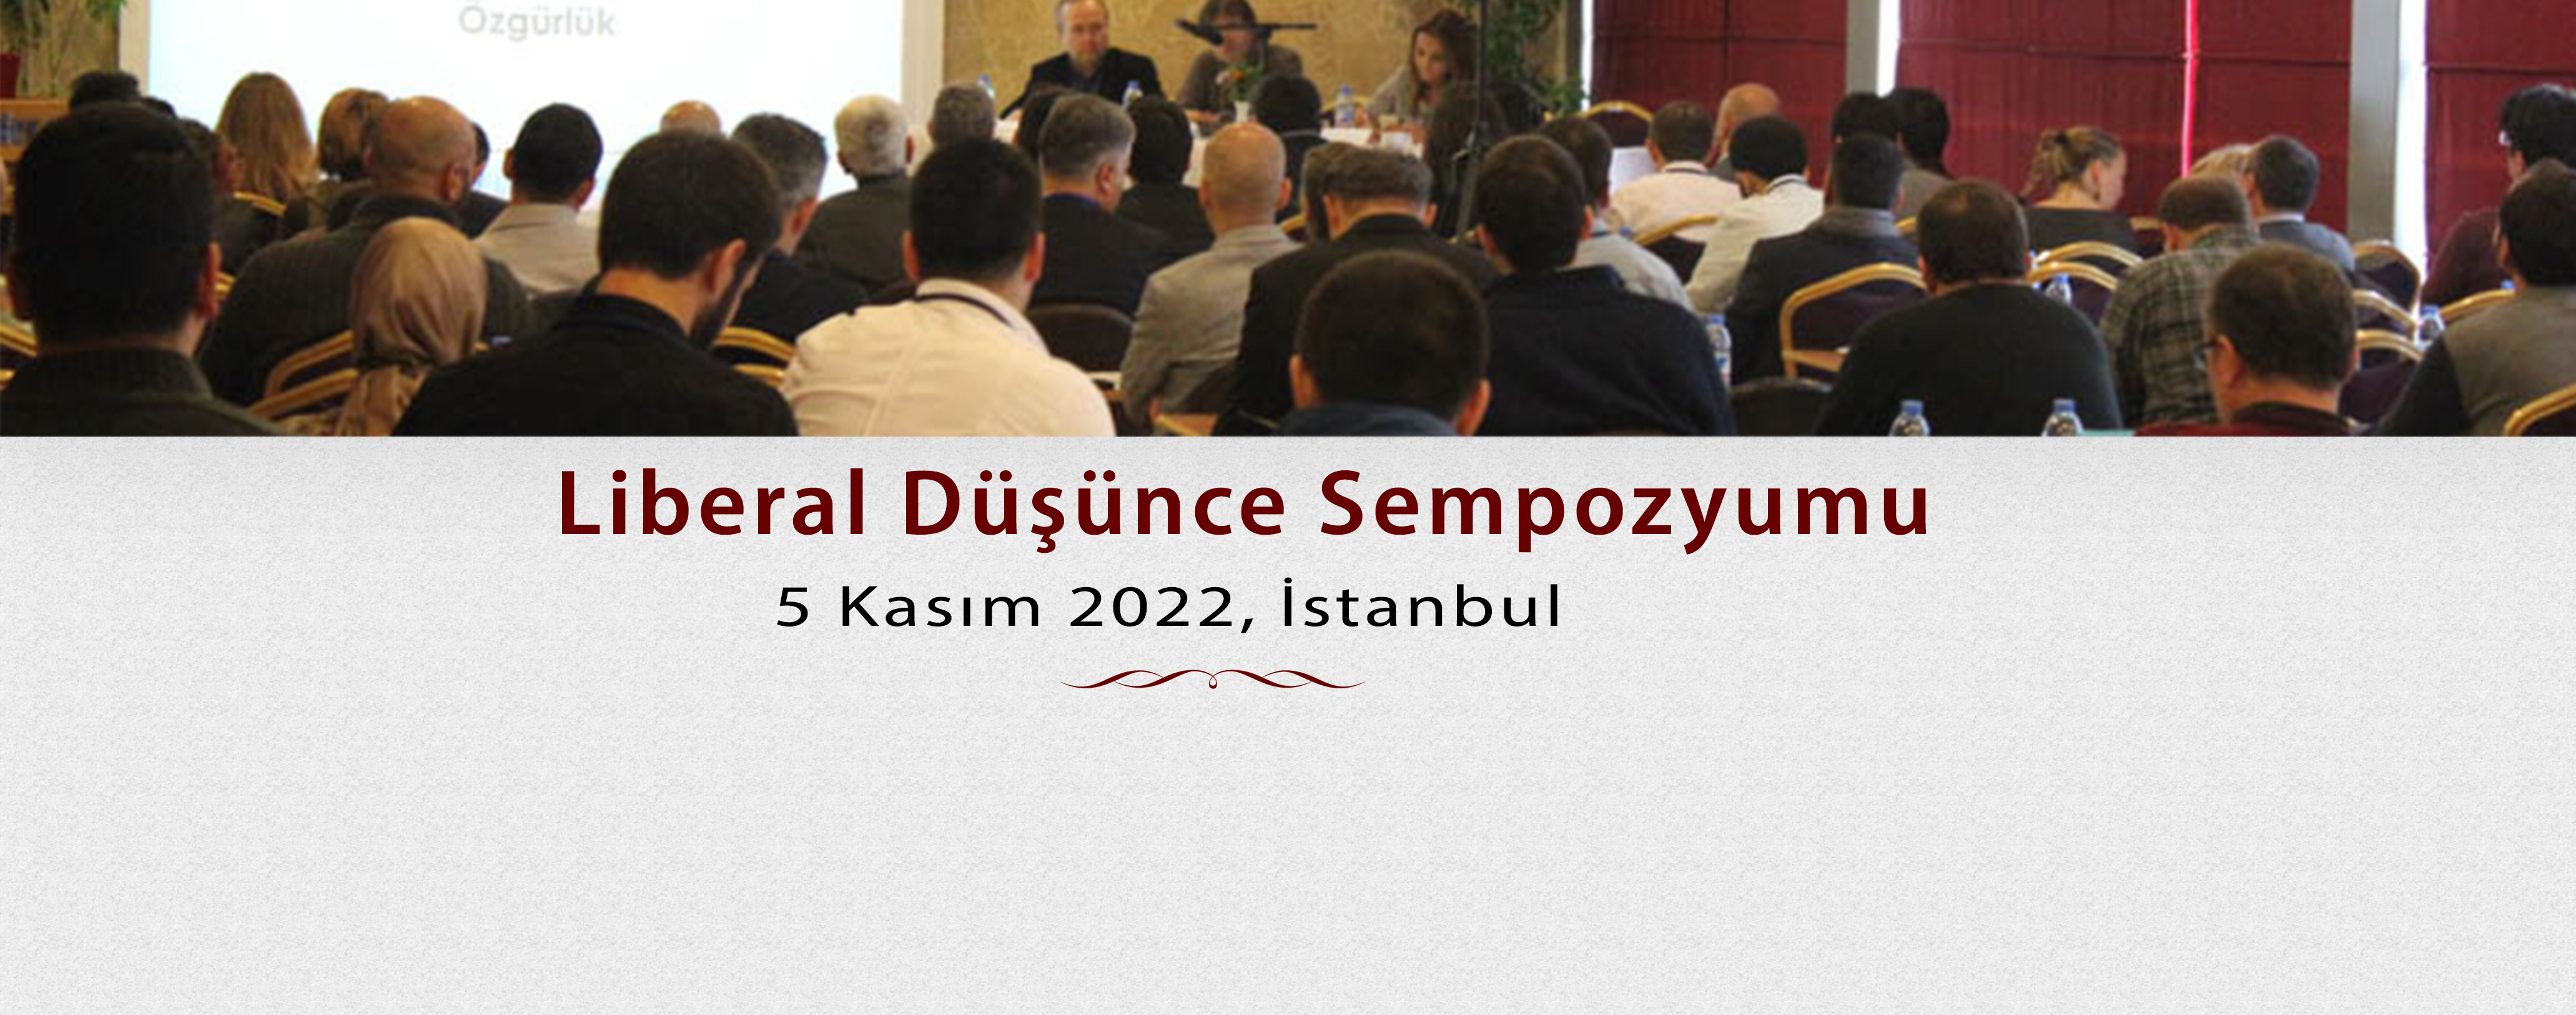 Symposium for Liberal Thought, 5 November 2022